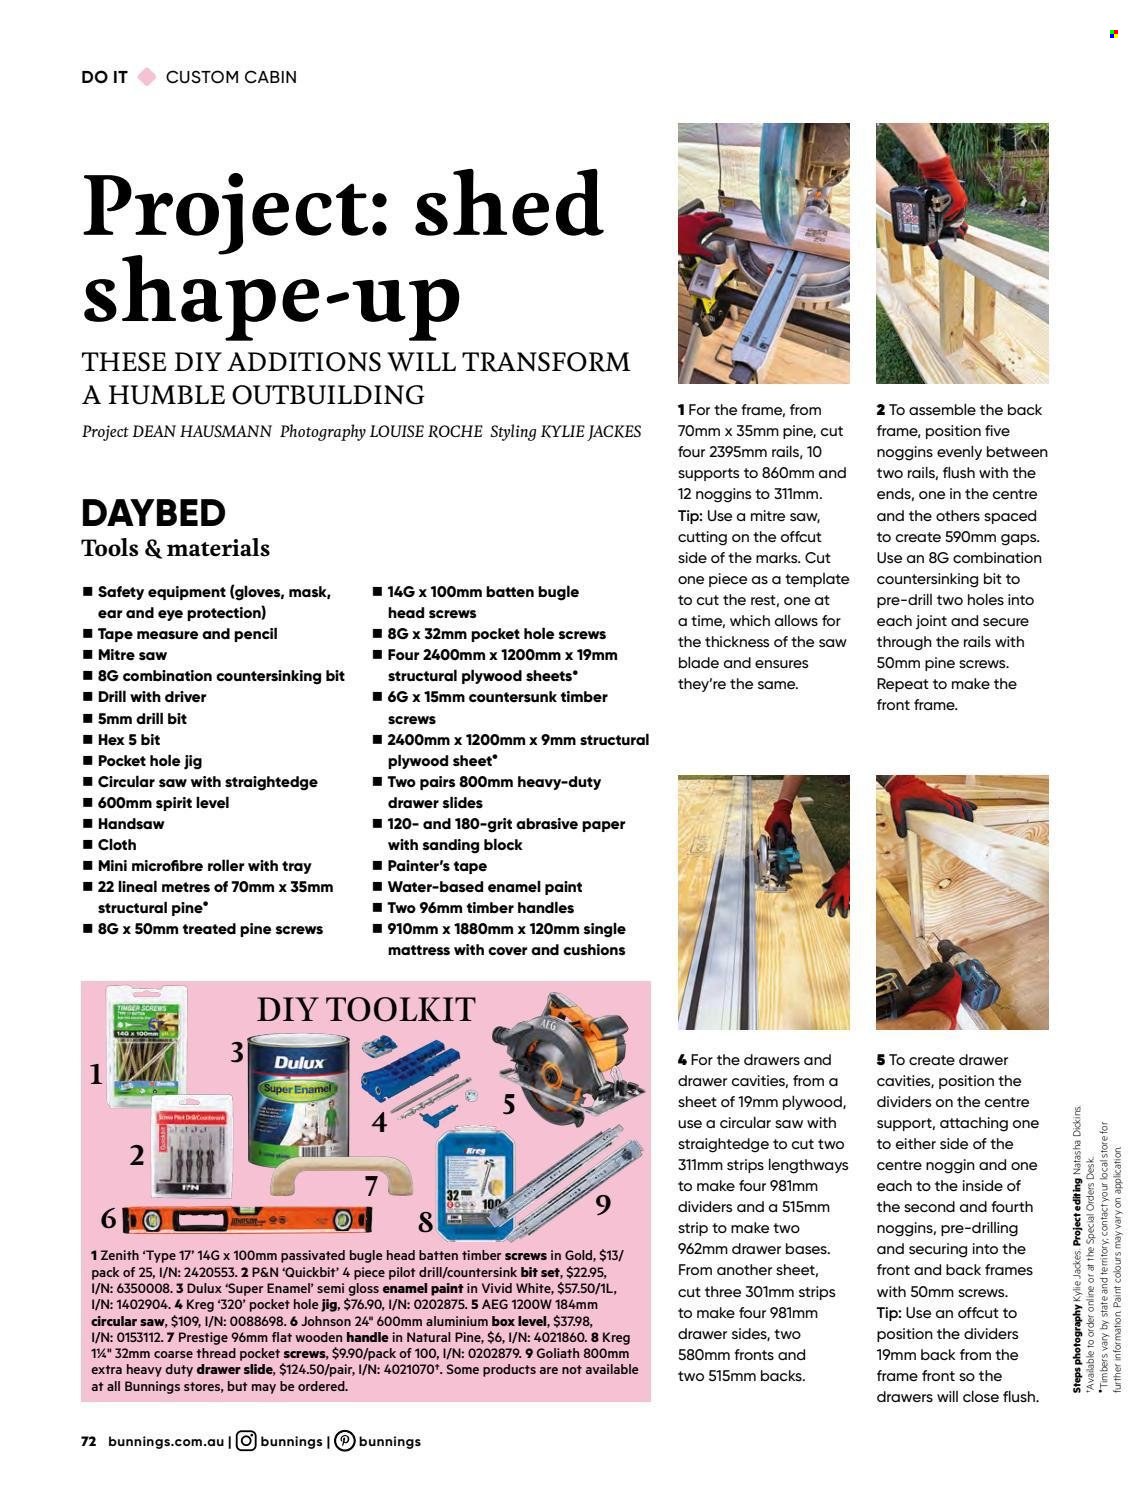 thumbnail - Bunnings Warehouse Catalogue - 1 Jan 2022 - 31 Jan 2022 - Sales products - drawer base, daybed, mattress, desk, cushion, paper, pencil, Pilot, AEG, roller, gloss enamel, paint, Dulux, circular saw, saw, handsaw, measuring tape, shed. Page 72.